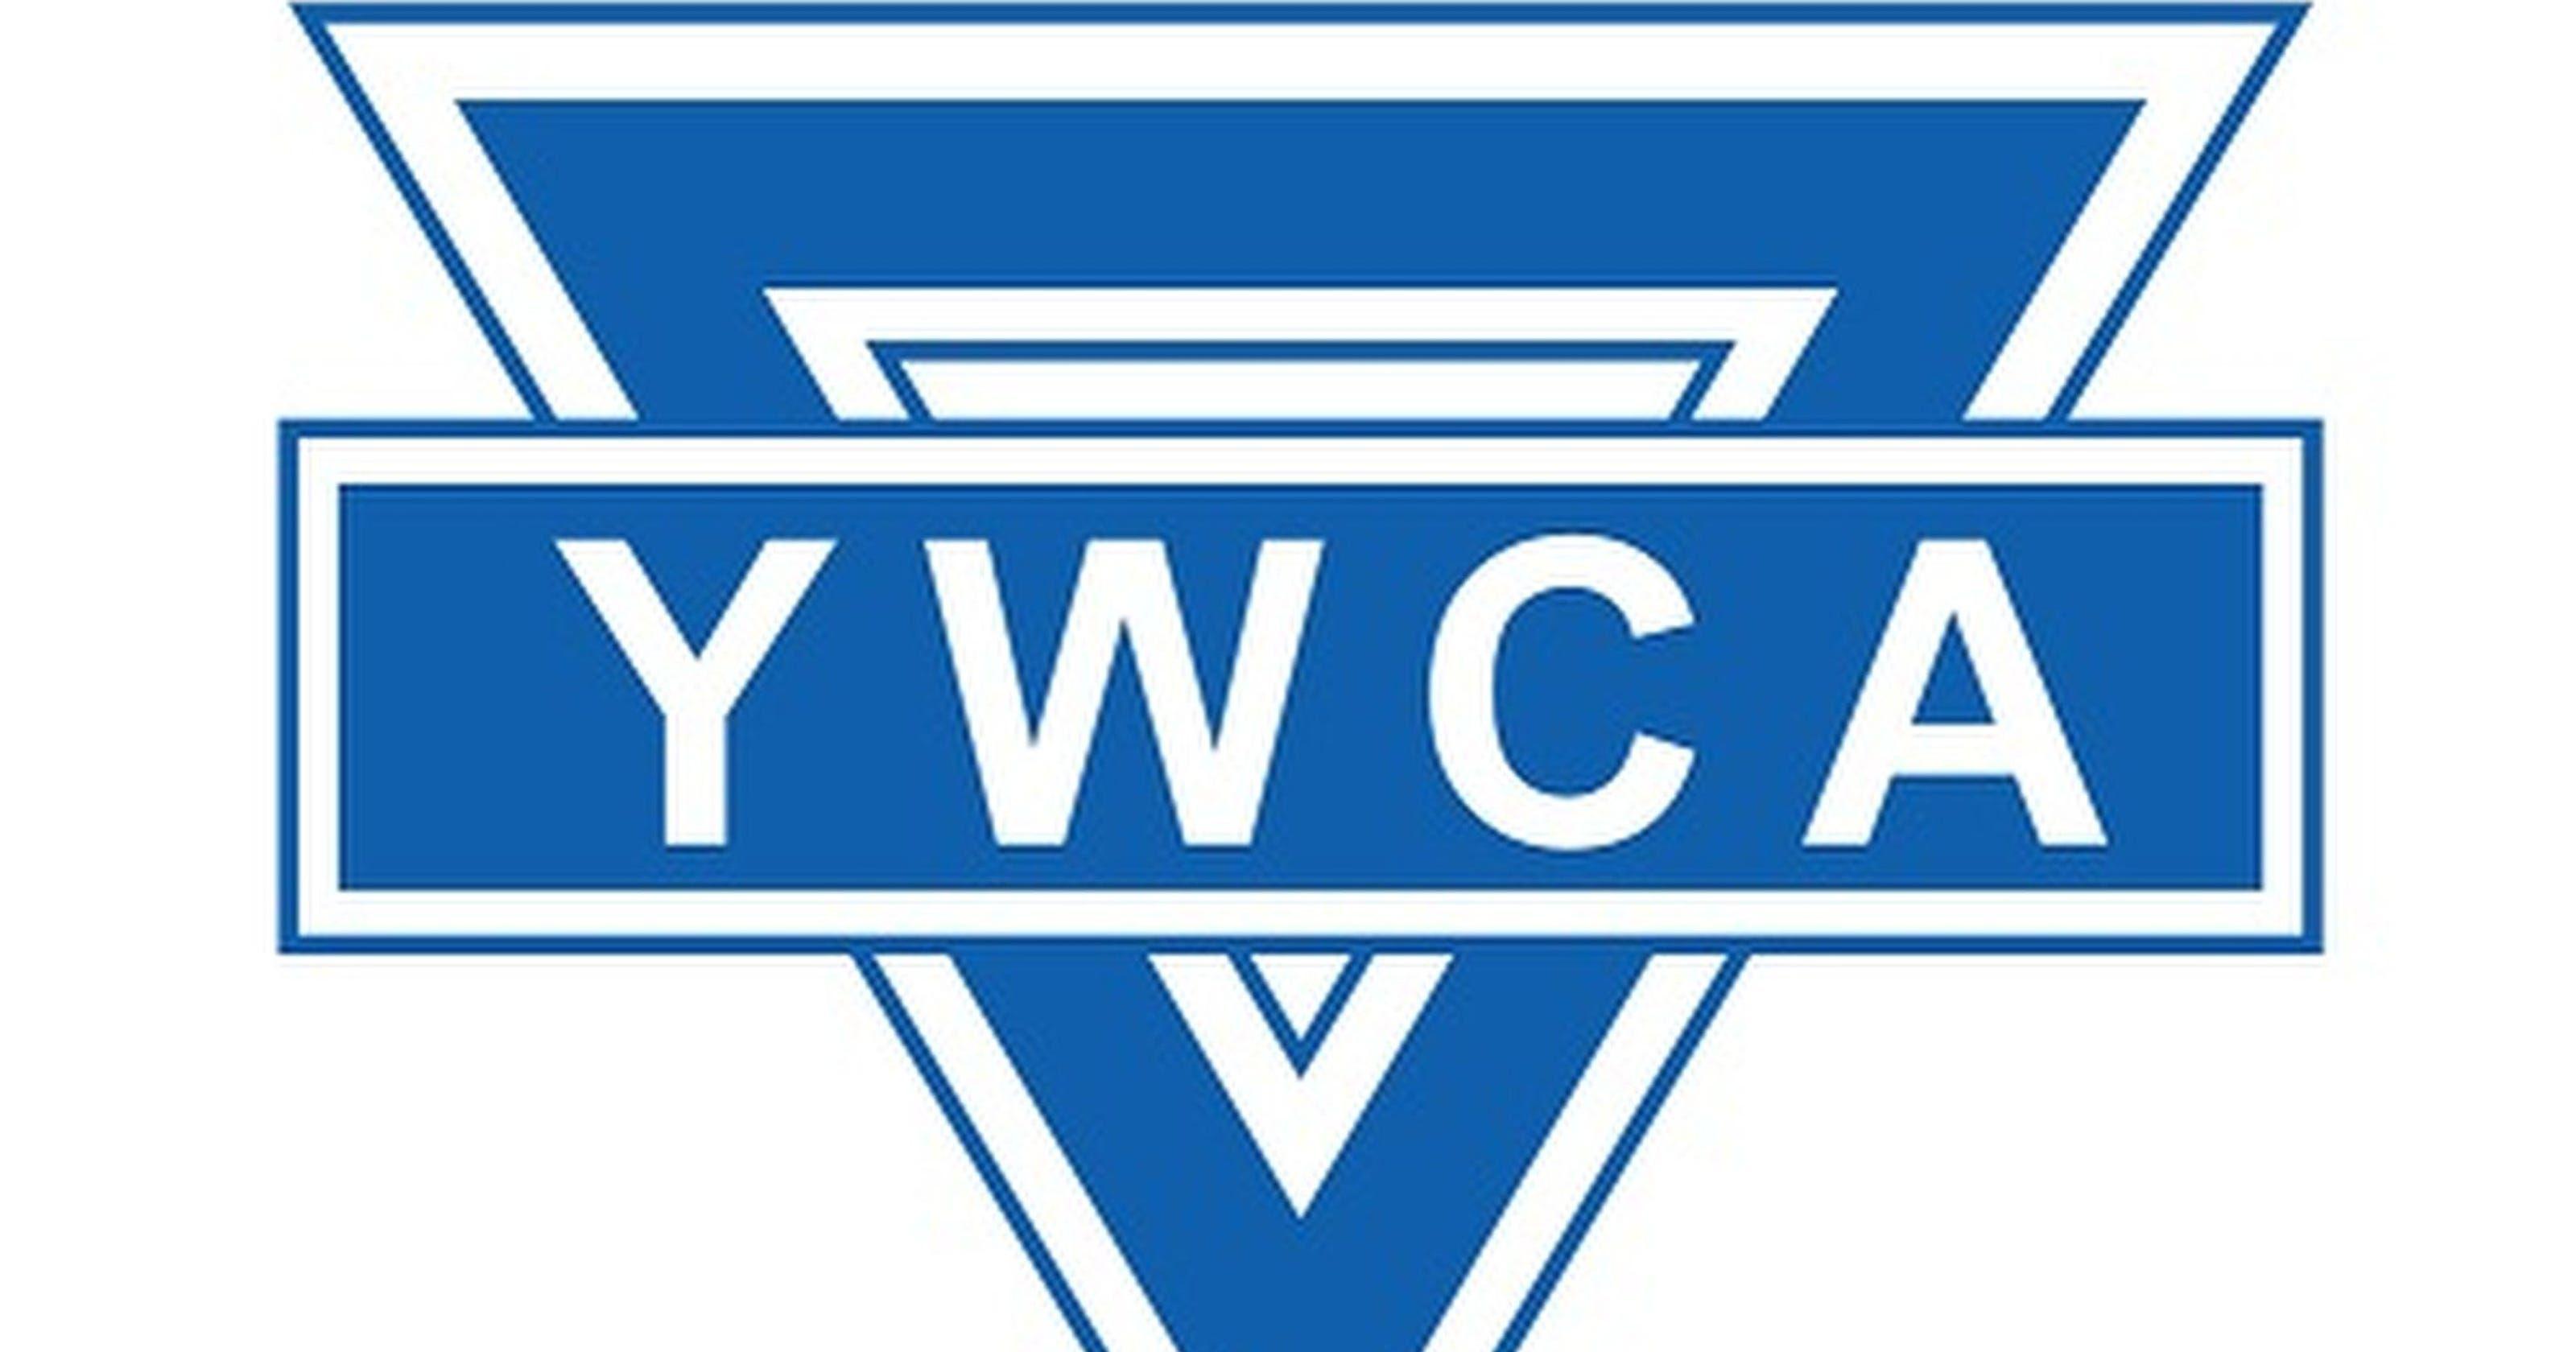 YWCA Logo - Wine Women and Shoes to benefits victim of domestic violence